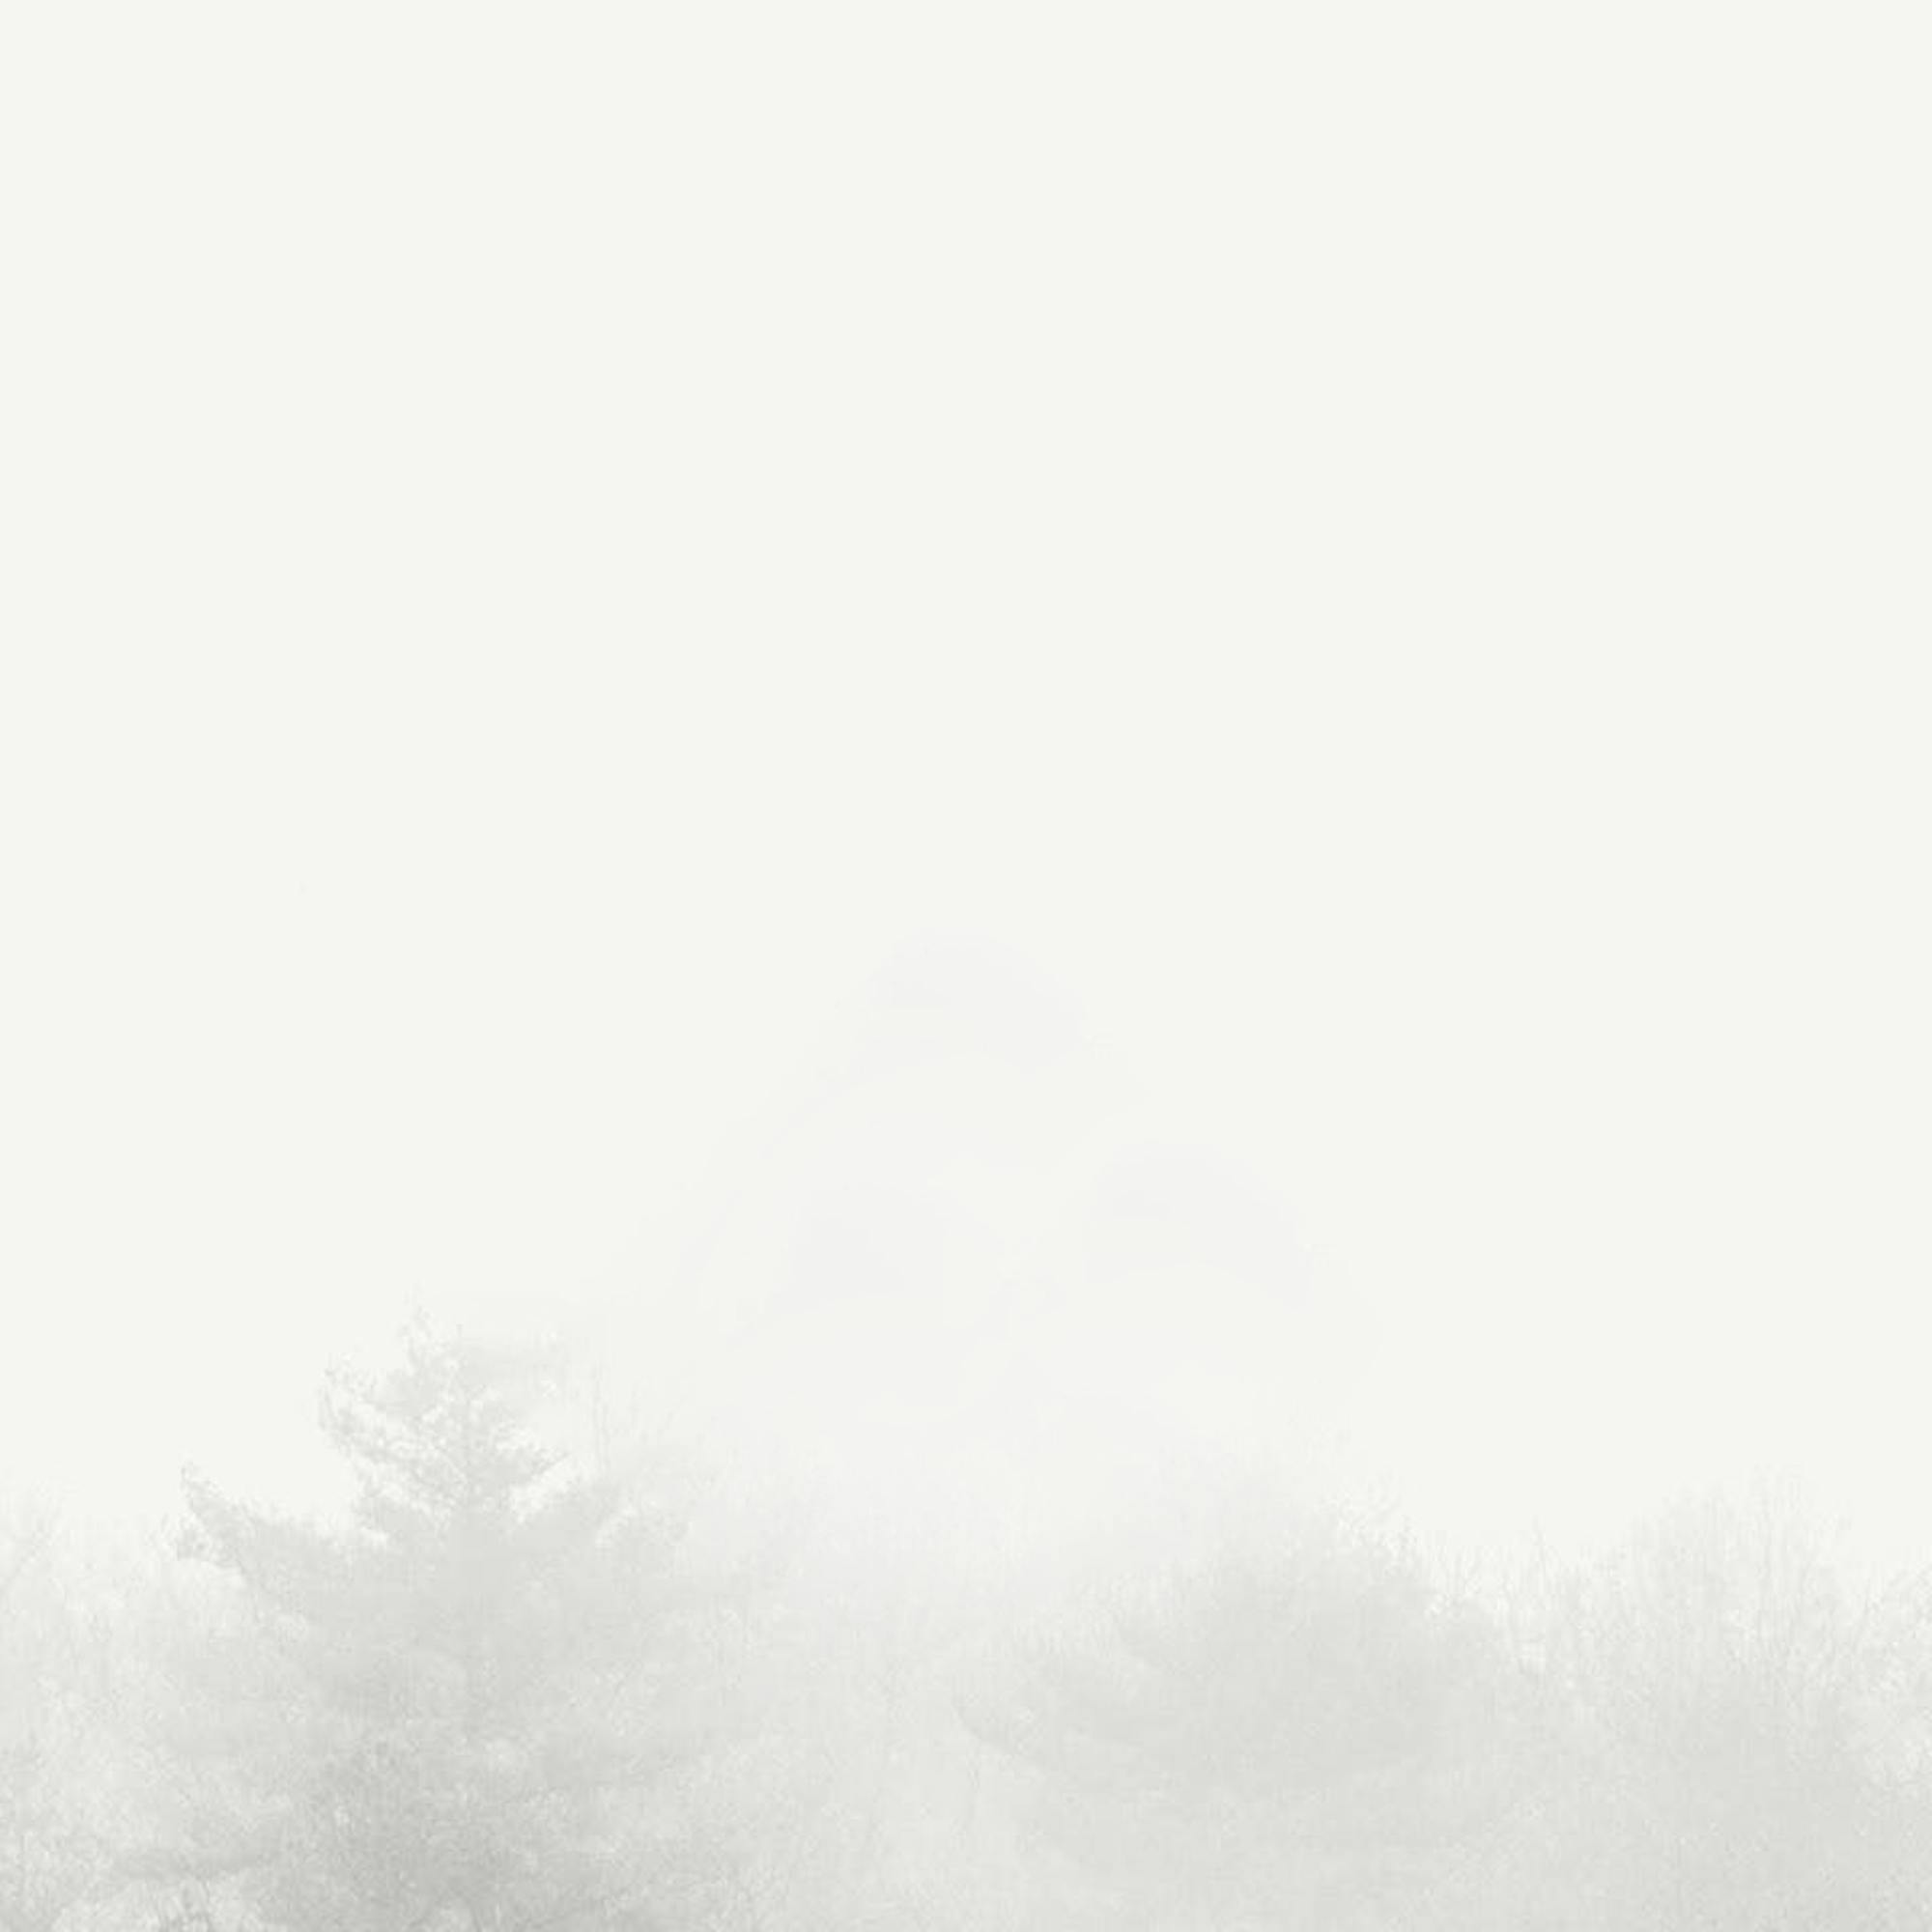 Background image of trees in the mist. 